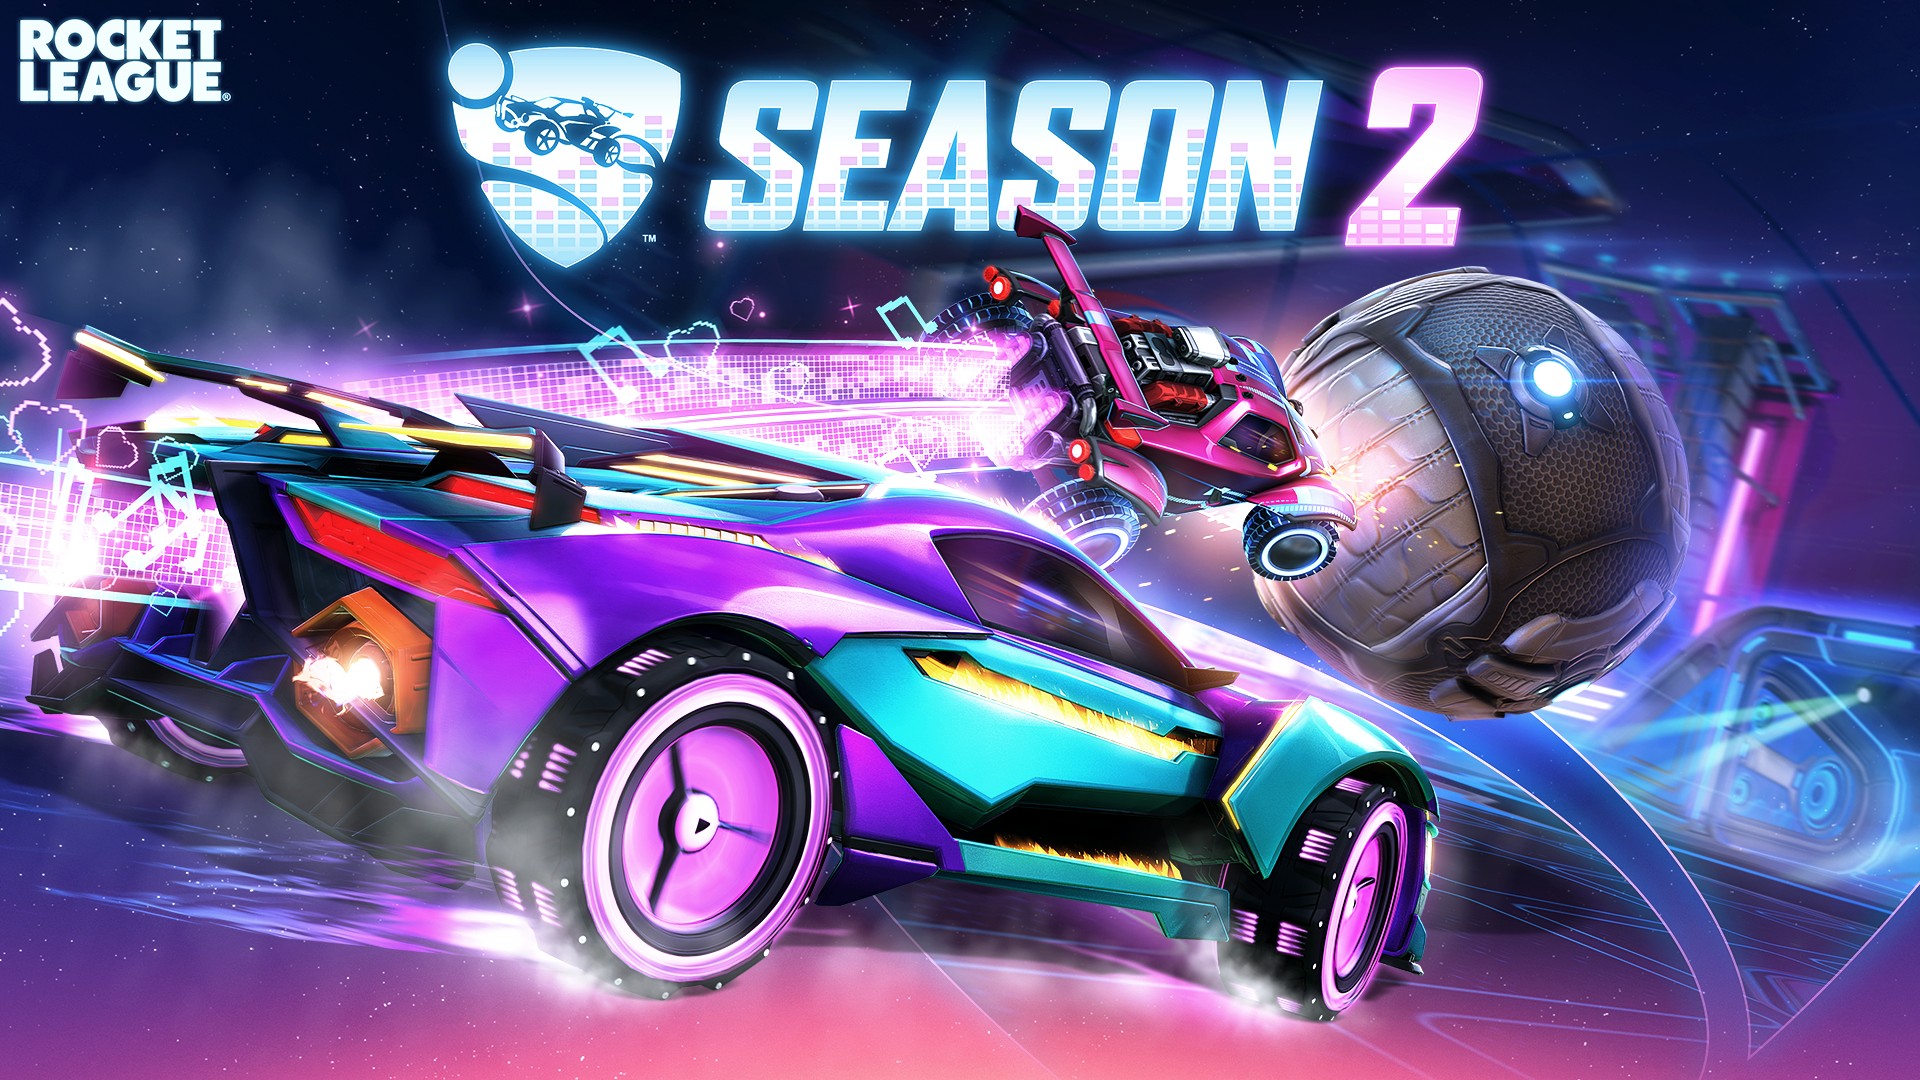 Season 2 Drops December 9 In Rocket League With Xbox Series X S Optimizations Xbox Wire